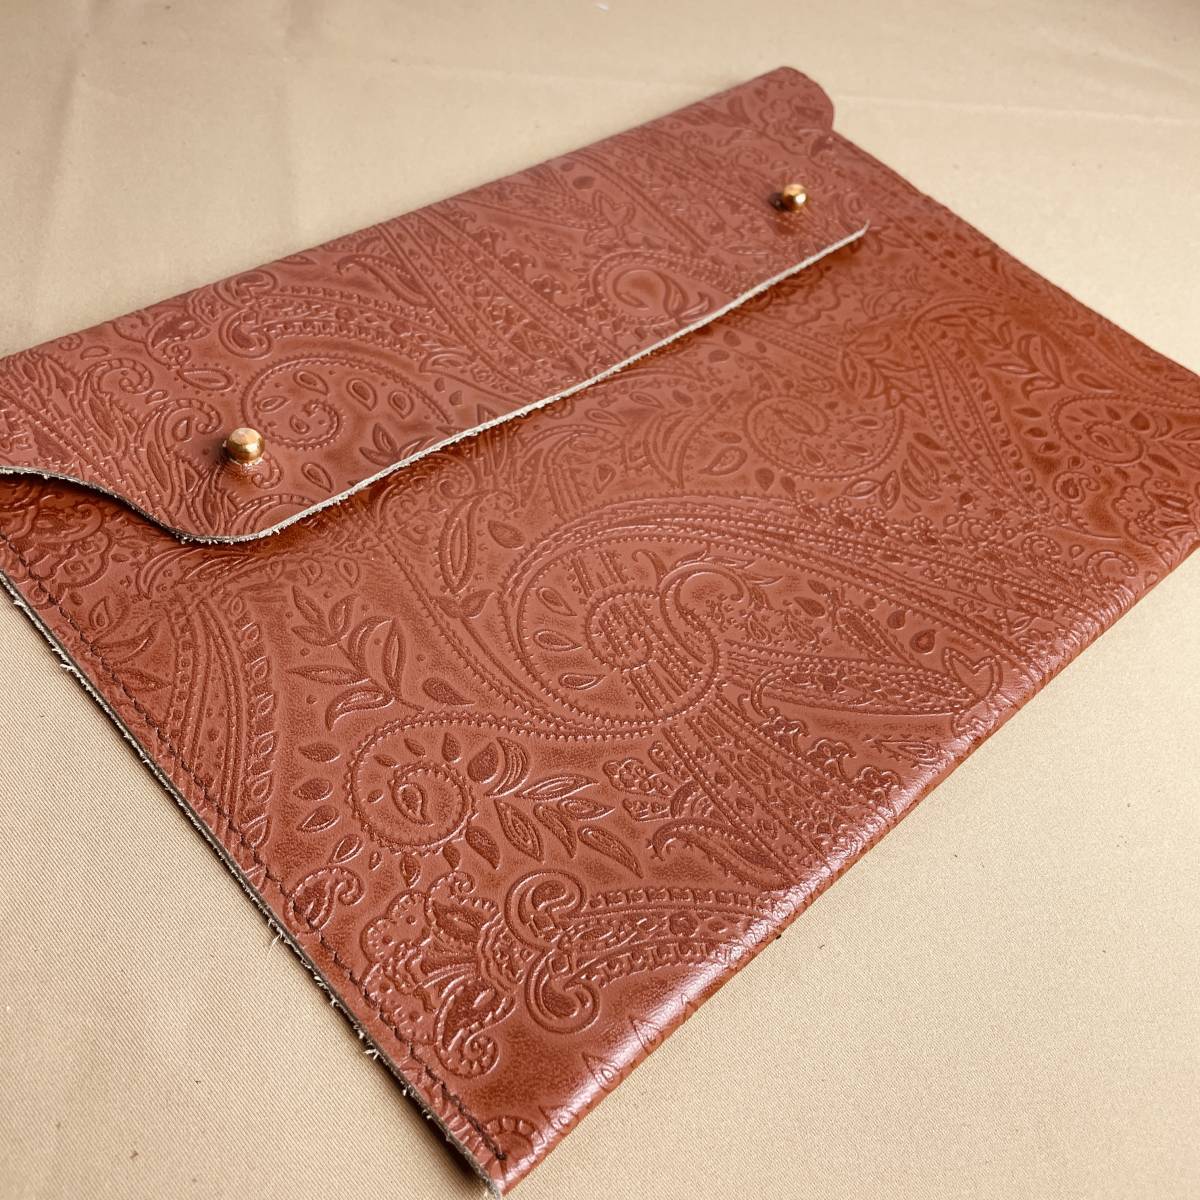  leather clutch bag peiz Lee type pushed . combination Brown original leather by using . simple prejudice hand made made in Japan B3133